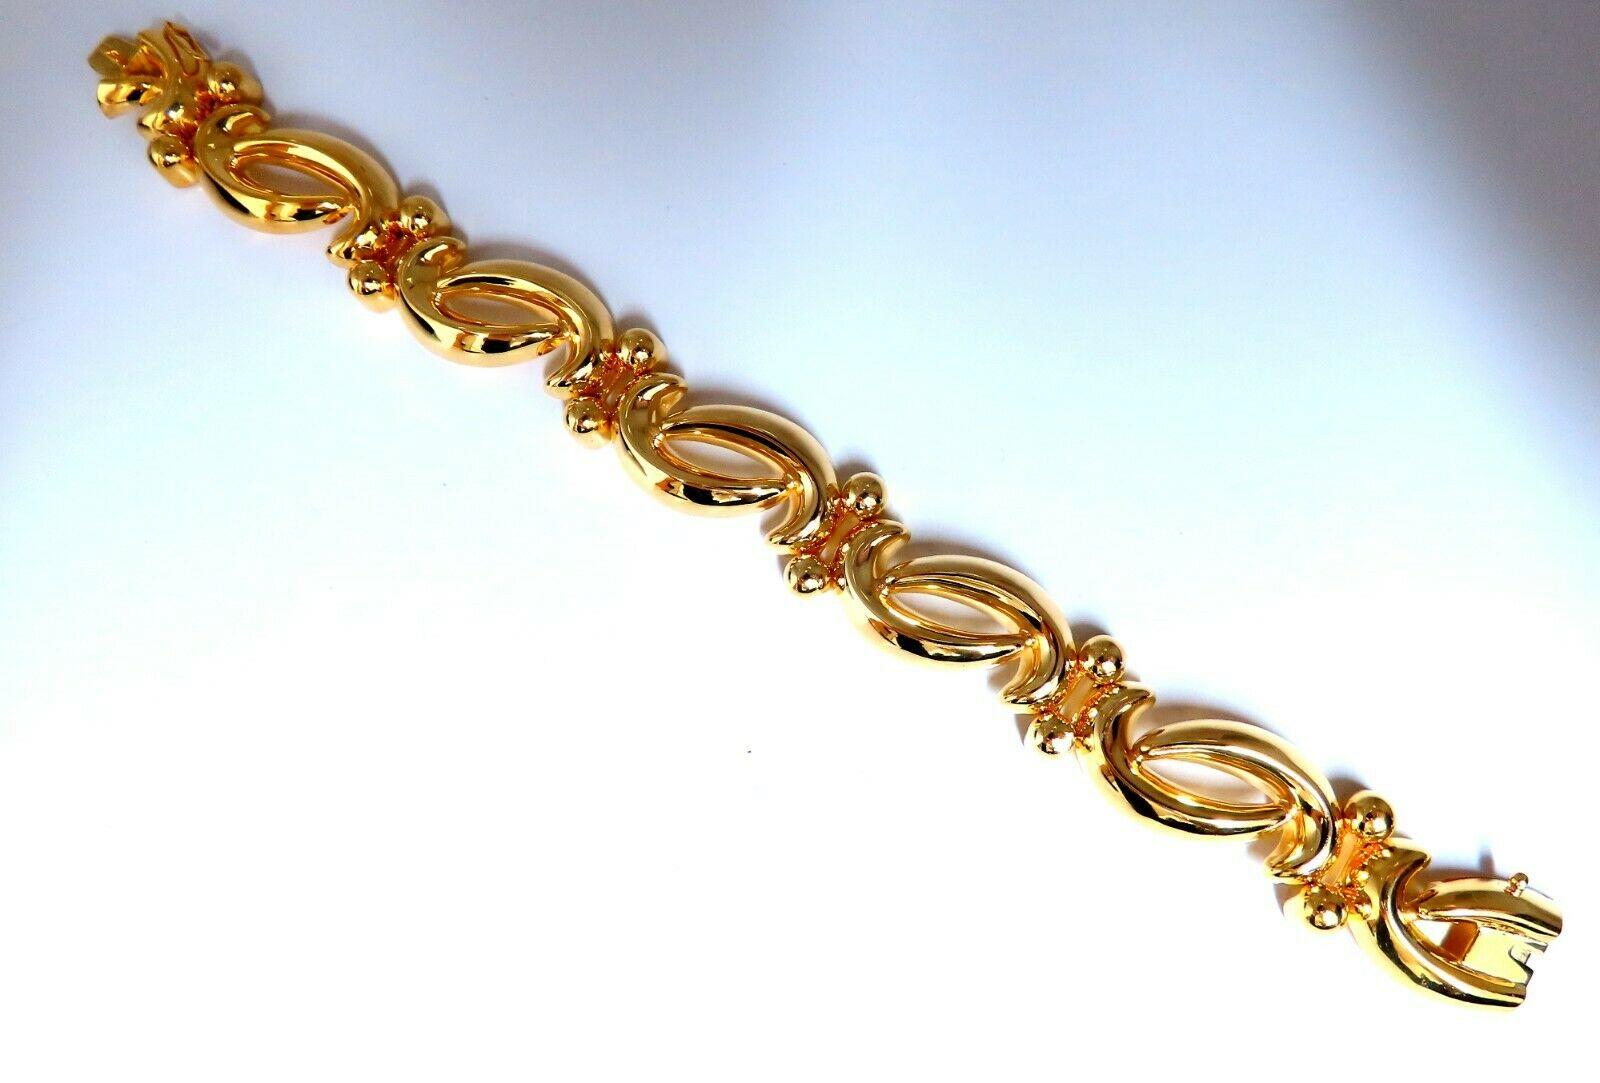 Iconic Link Bracelet

7.25 inch / wearable length

26.9 Grams.

14mm wide links

Secure & Comfortable clasp

14kt yellow gold